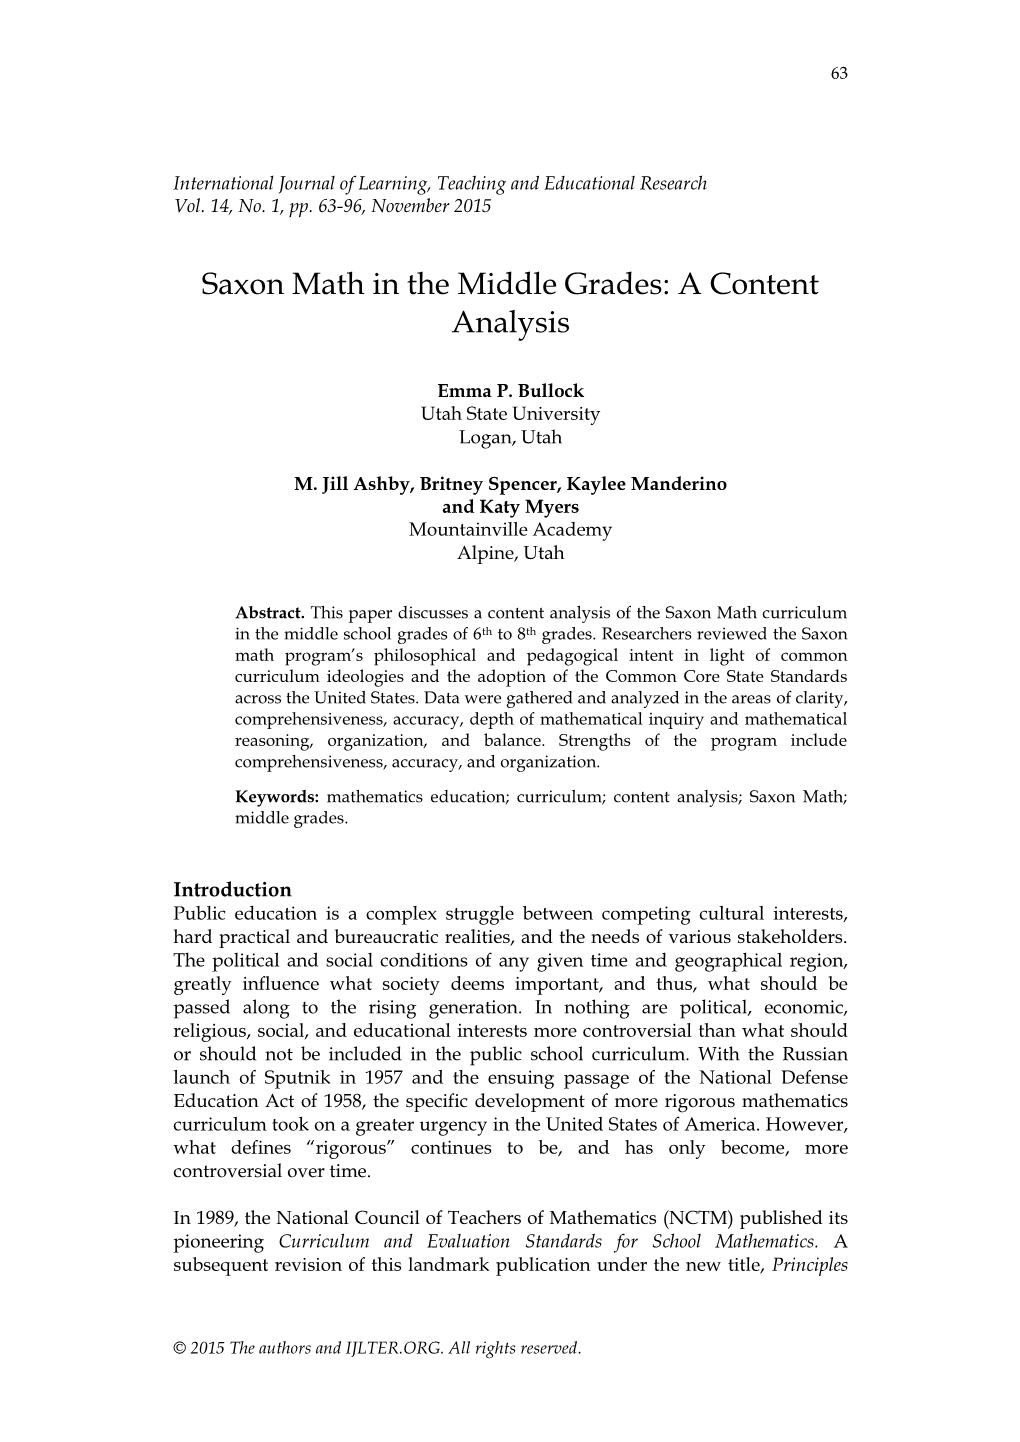 Saxon Math in the Middle Grades: a Content Analysis